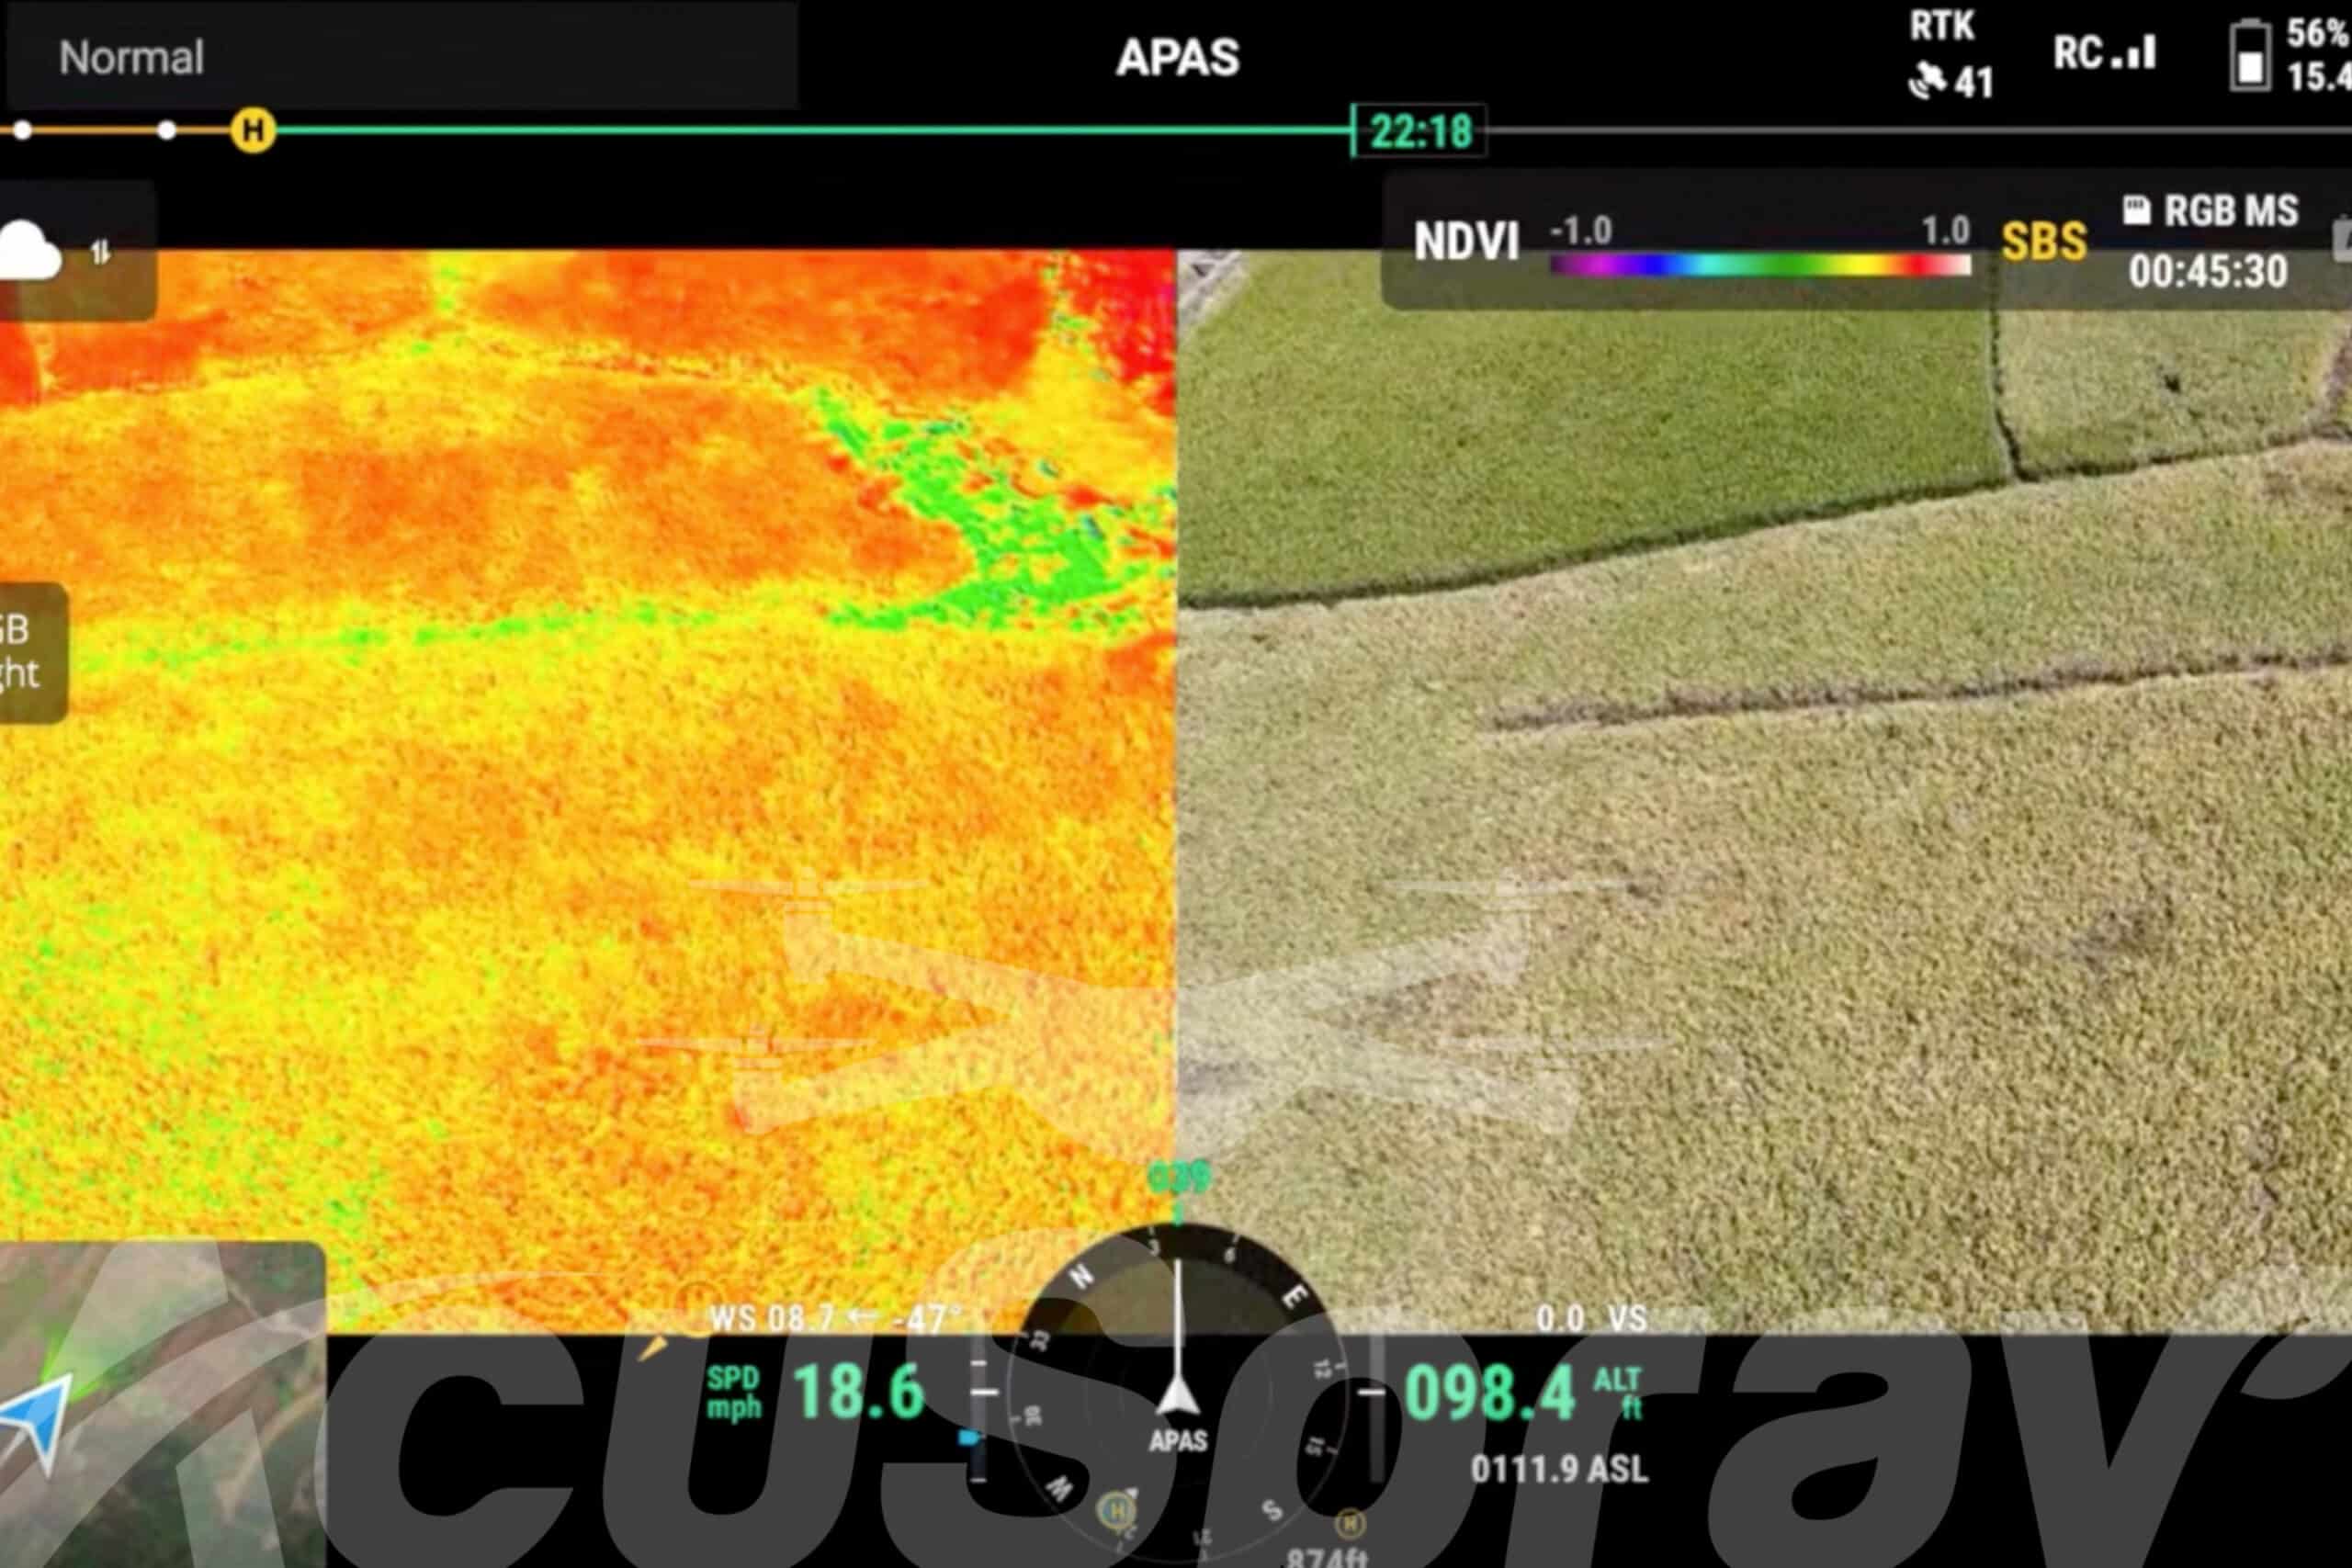 Image of AI-enabled drone interface scanning over a lush crop field.